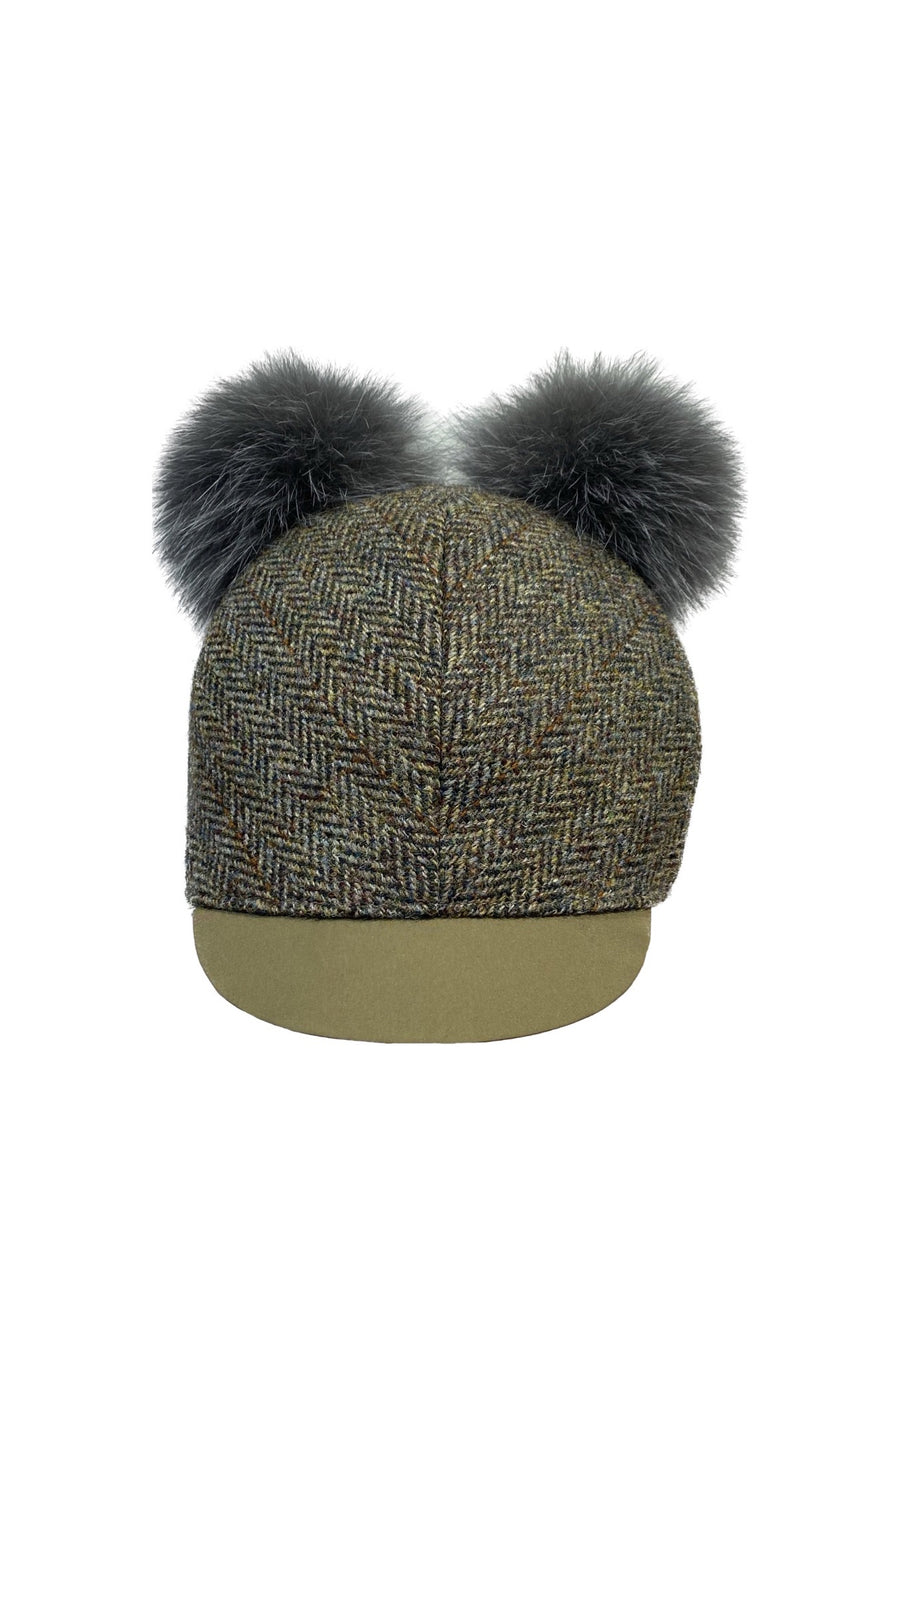 Hat made from Harris tweed